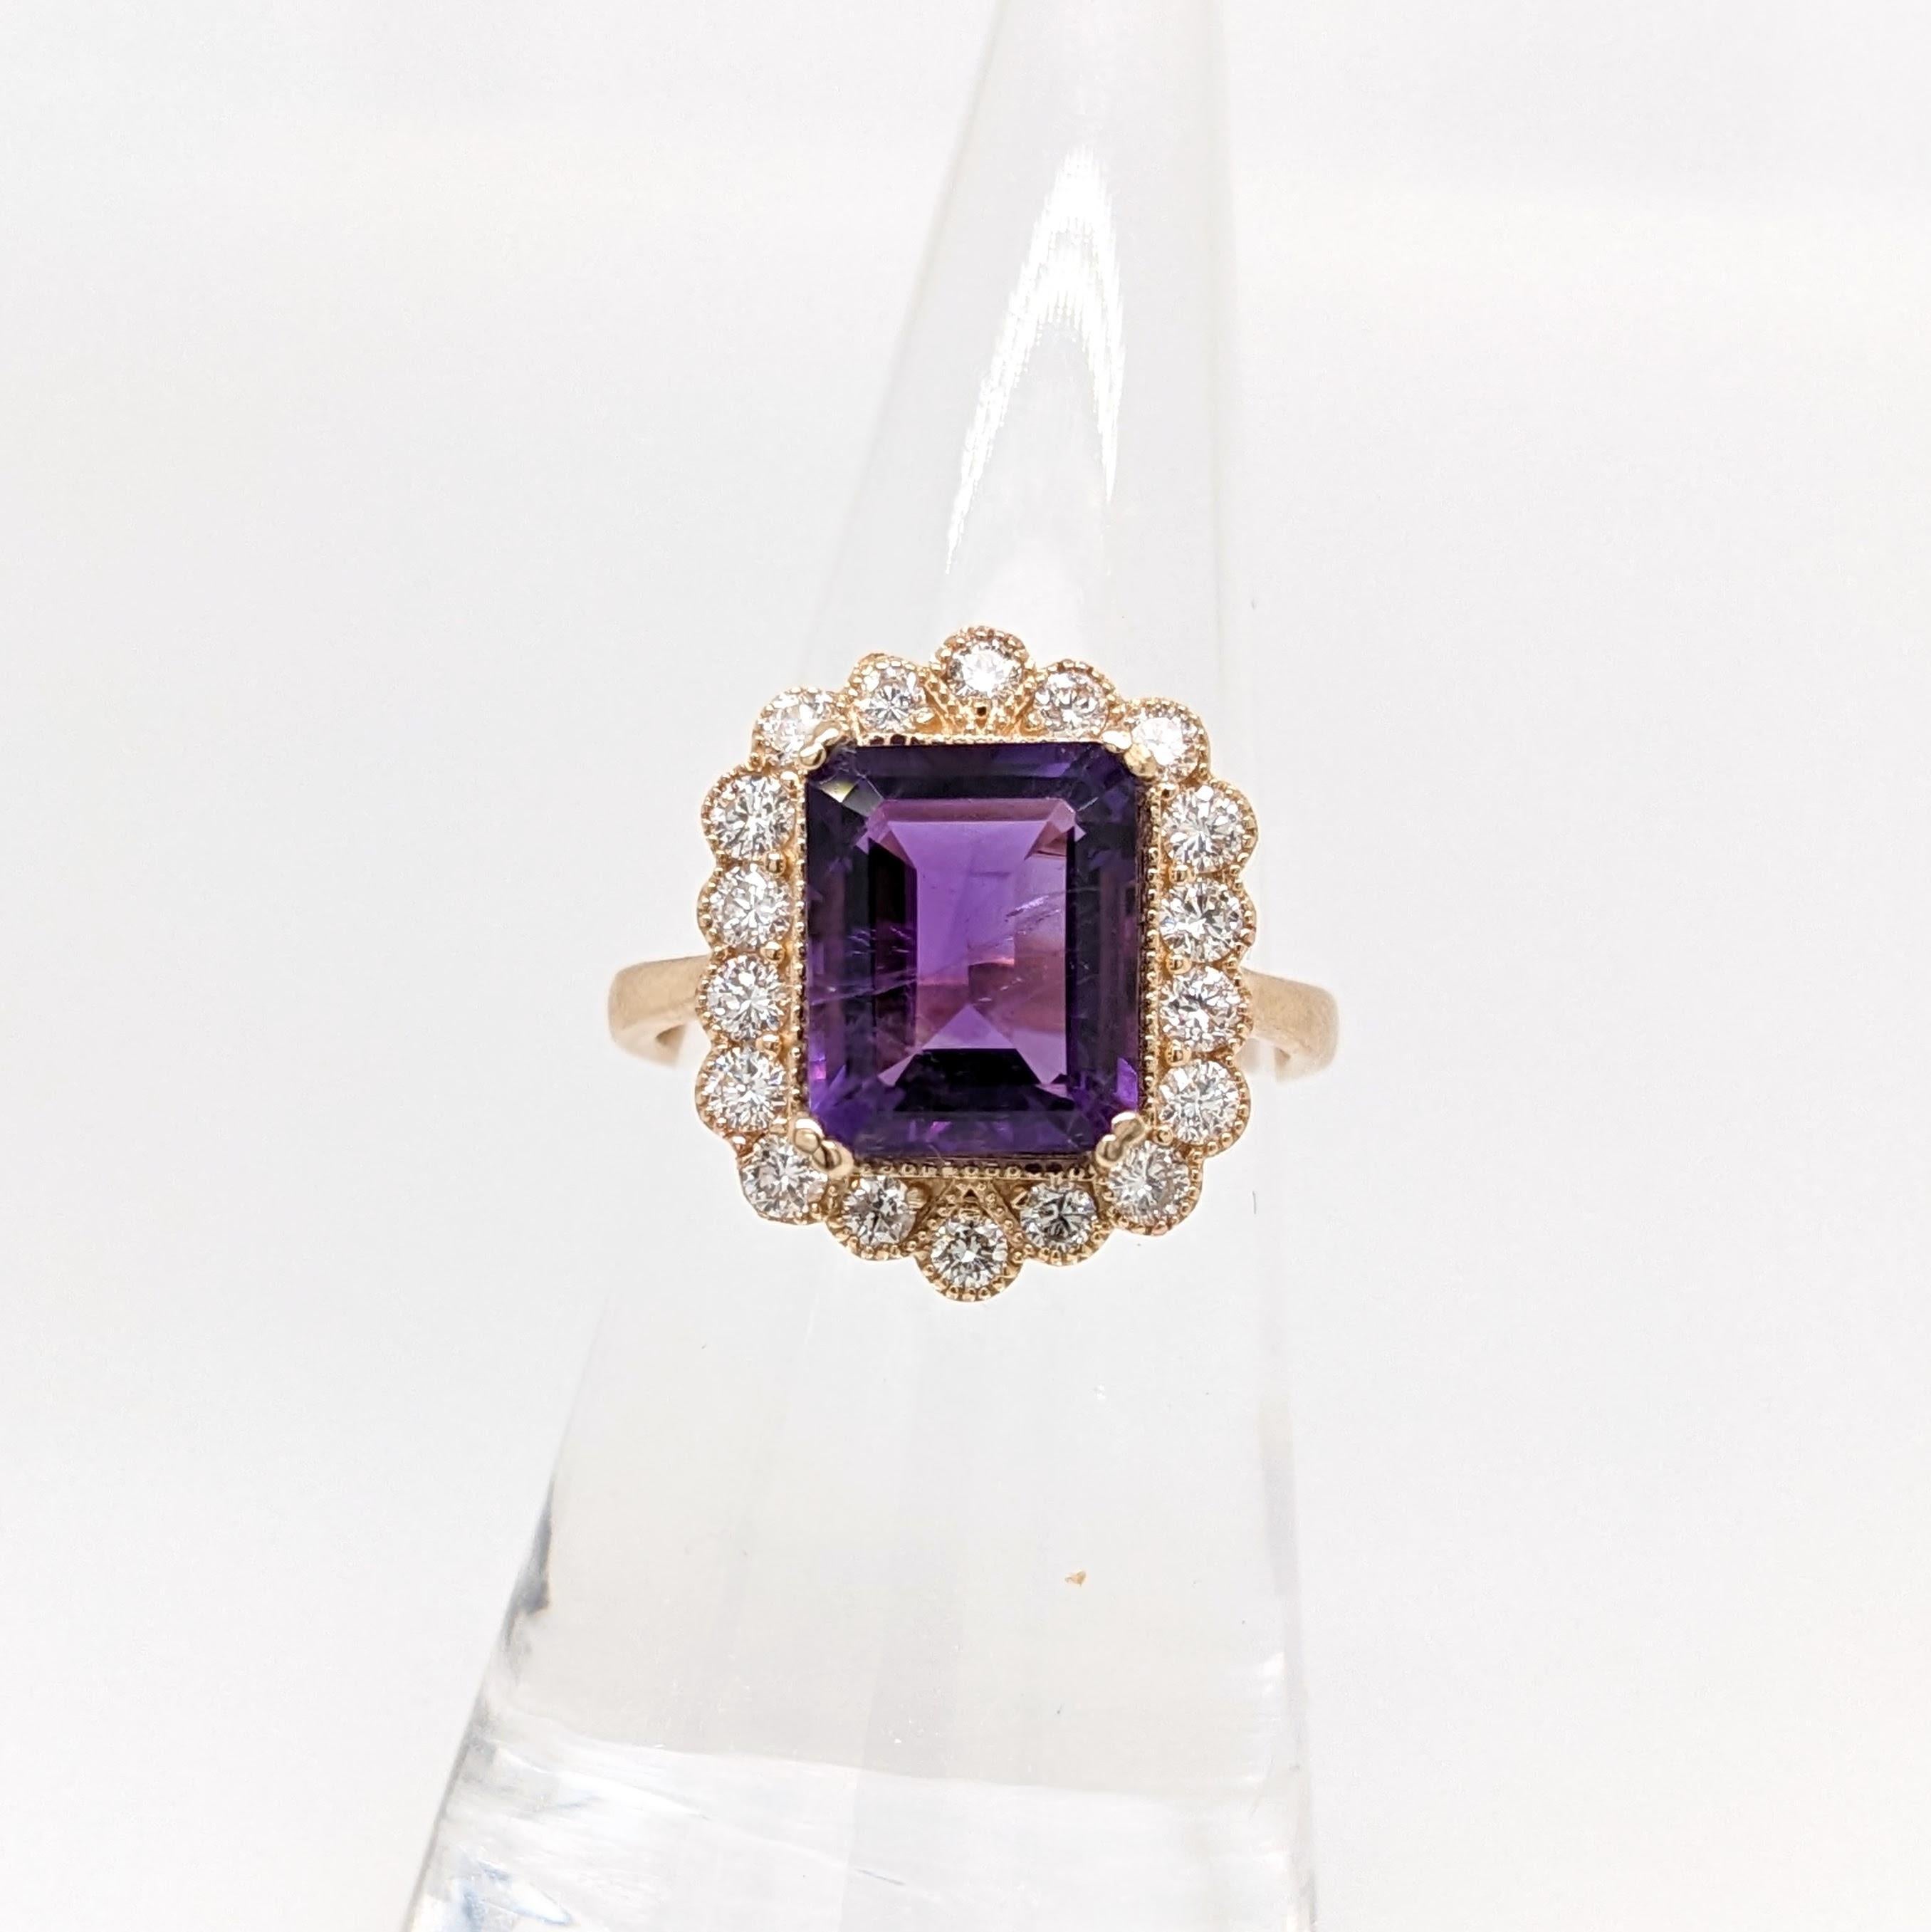 This gorgeous ring features a 3.19 carat emerald cut amethyst and a halo of natural earth mined diamonds with milgrain detail all set in solid 14K gold. This statement ring can be a beautiful february birthstone gift for your loved ones!